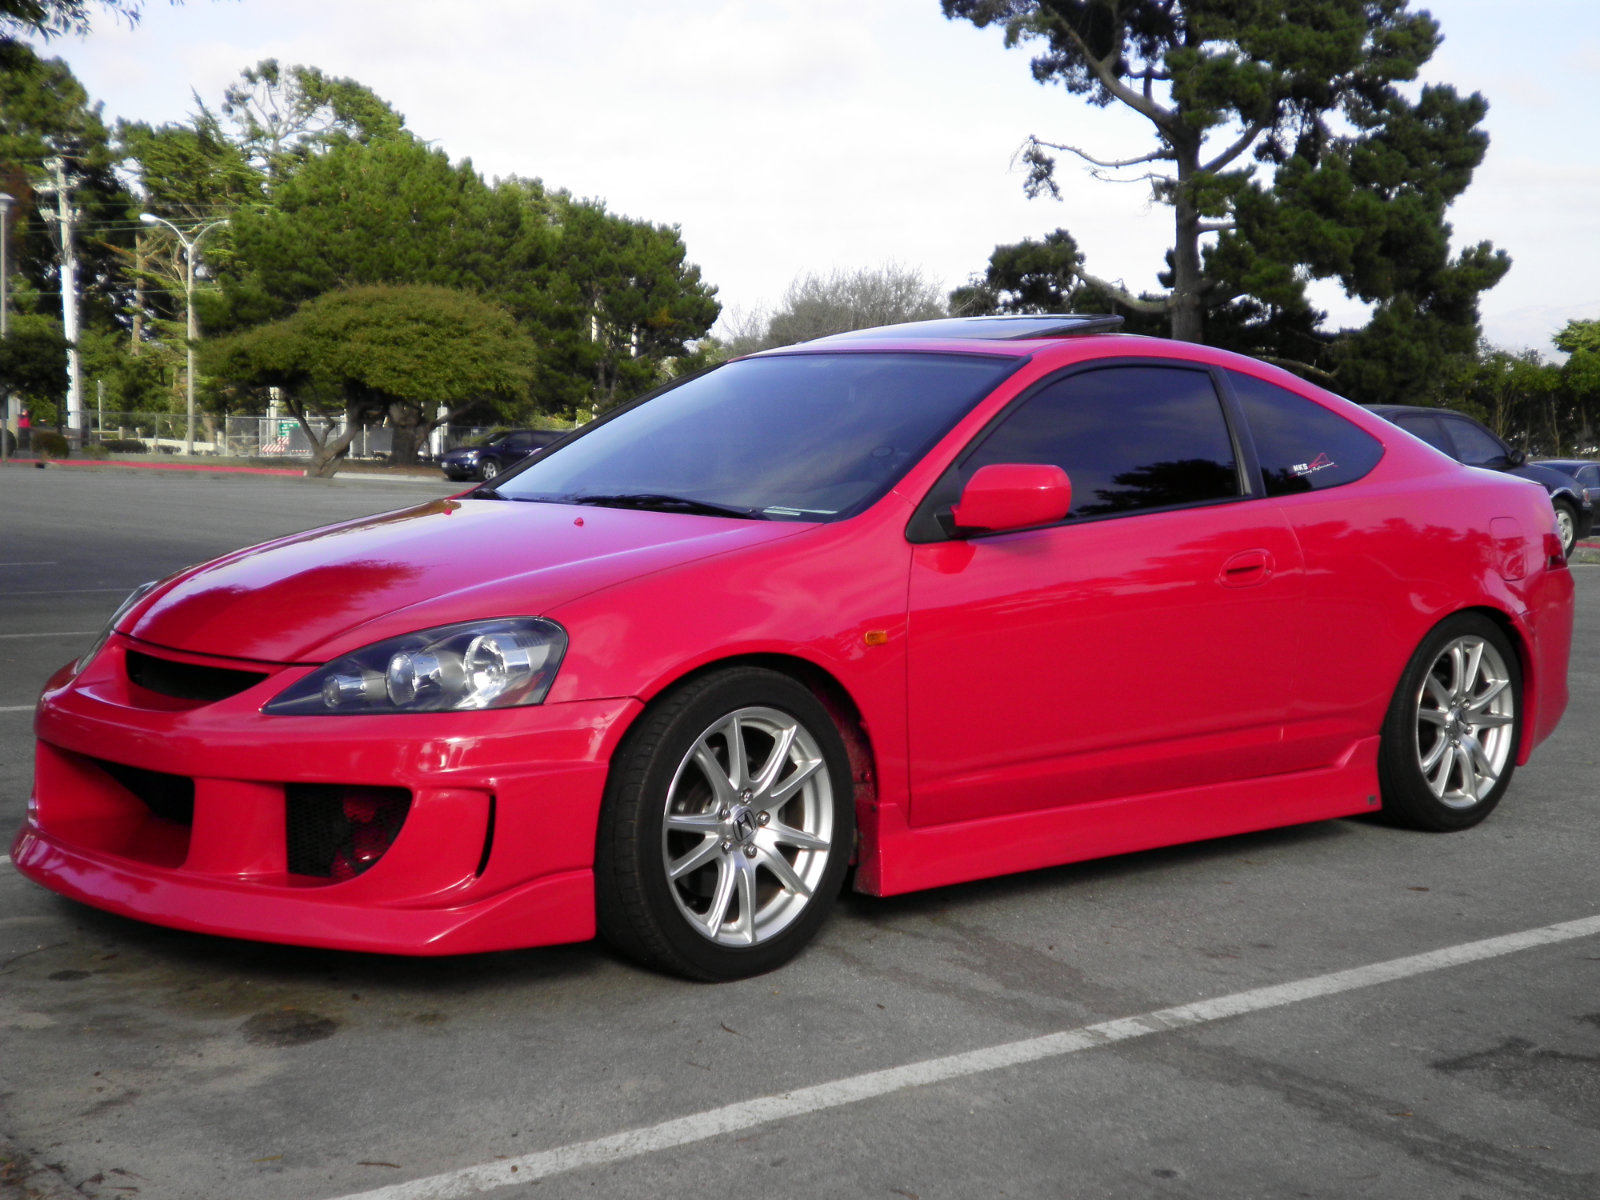 Immaculate 10k mile 2003 Acura RSX Type S For Sale/Trade in Monterey CA.